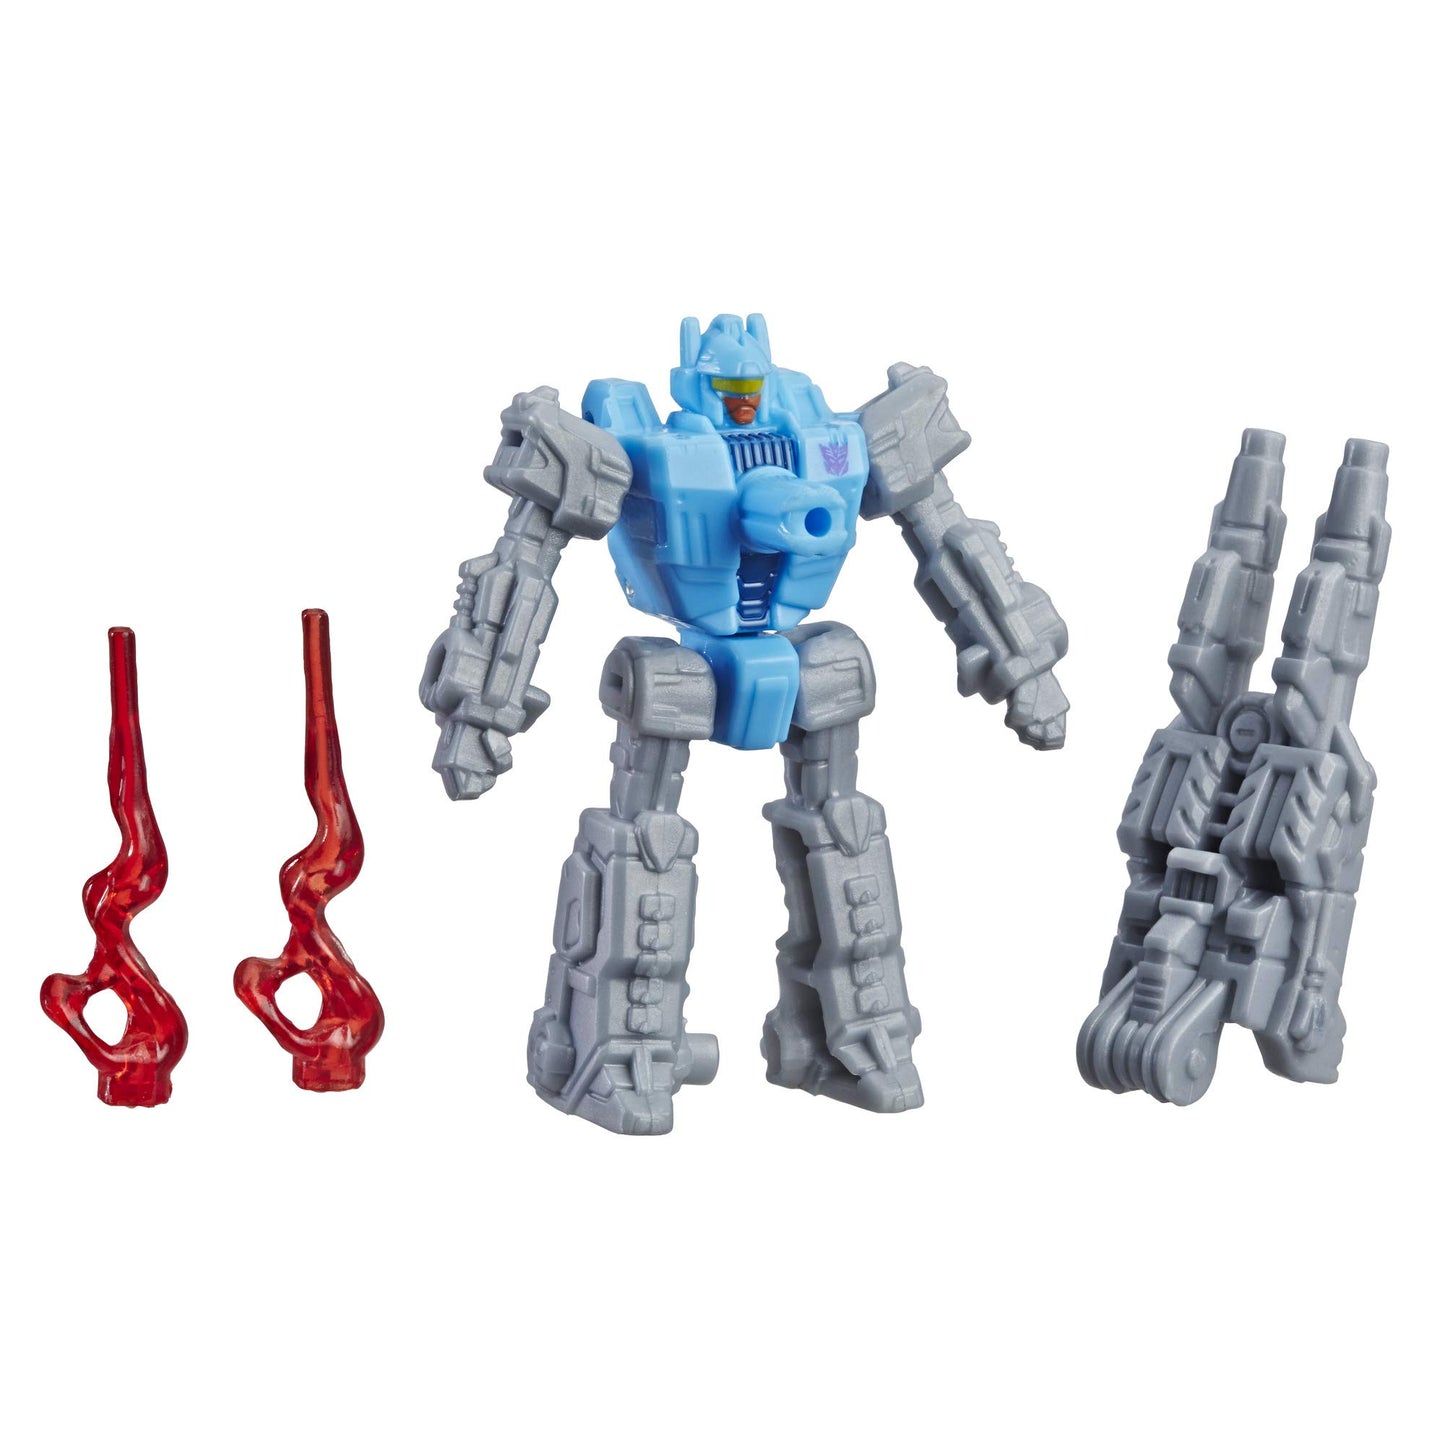 Transformers Generations Siege: War for Cybertron Trilogy Aimless Battle Master Action Figure WFC-S17